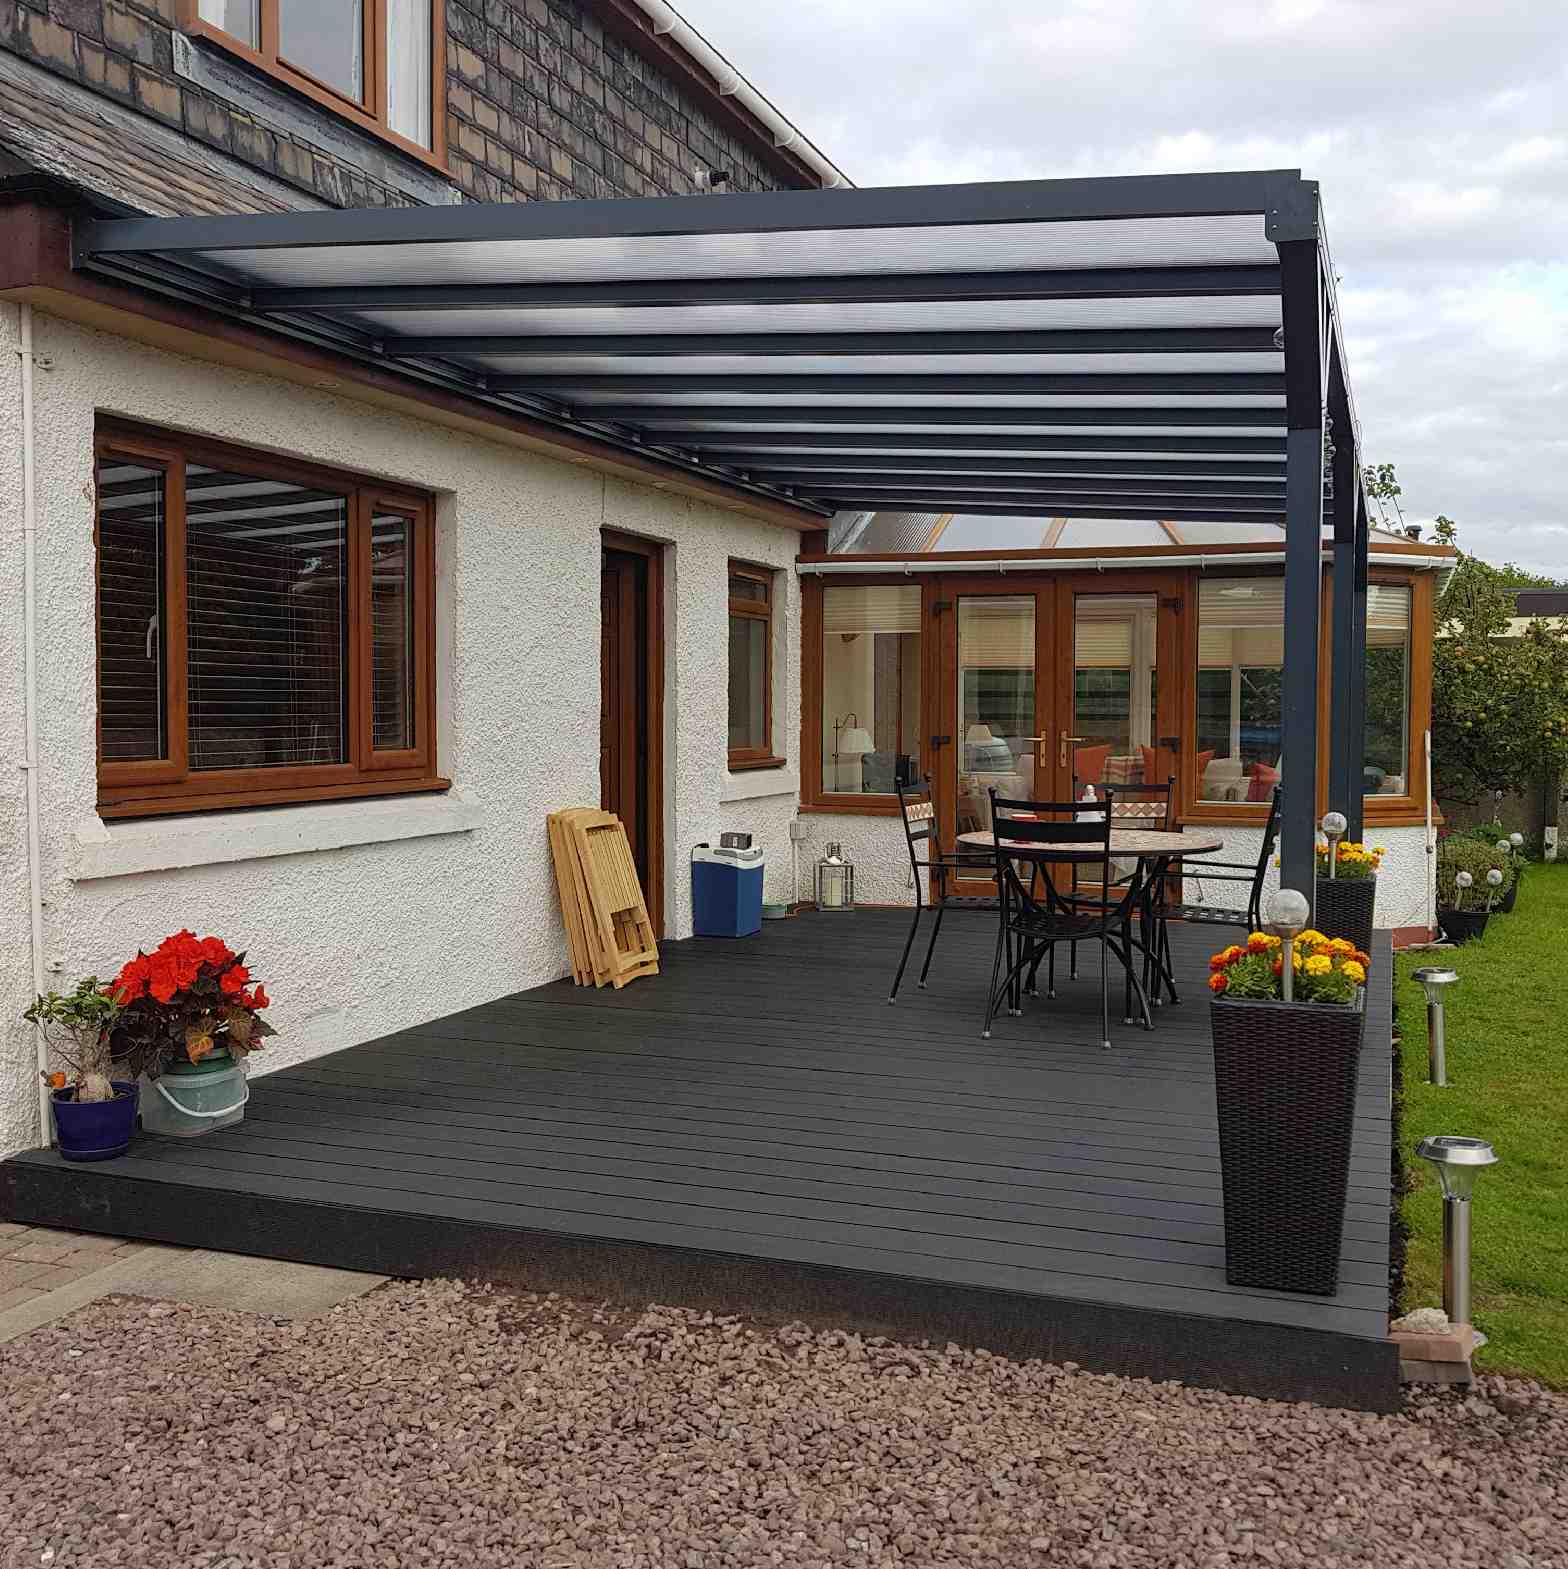 Buy Omega Verandah, Anthracite Grey, 6mm Glass Clear Plate Polycarbonate Glazing - 9.8m (W) x 3.0m (P), (5) Supporting Posts online today